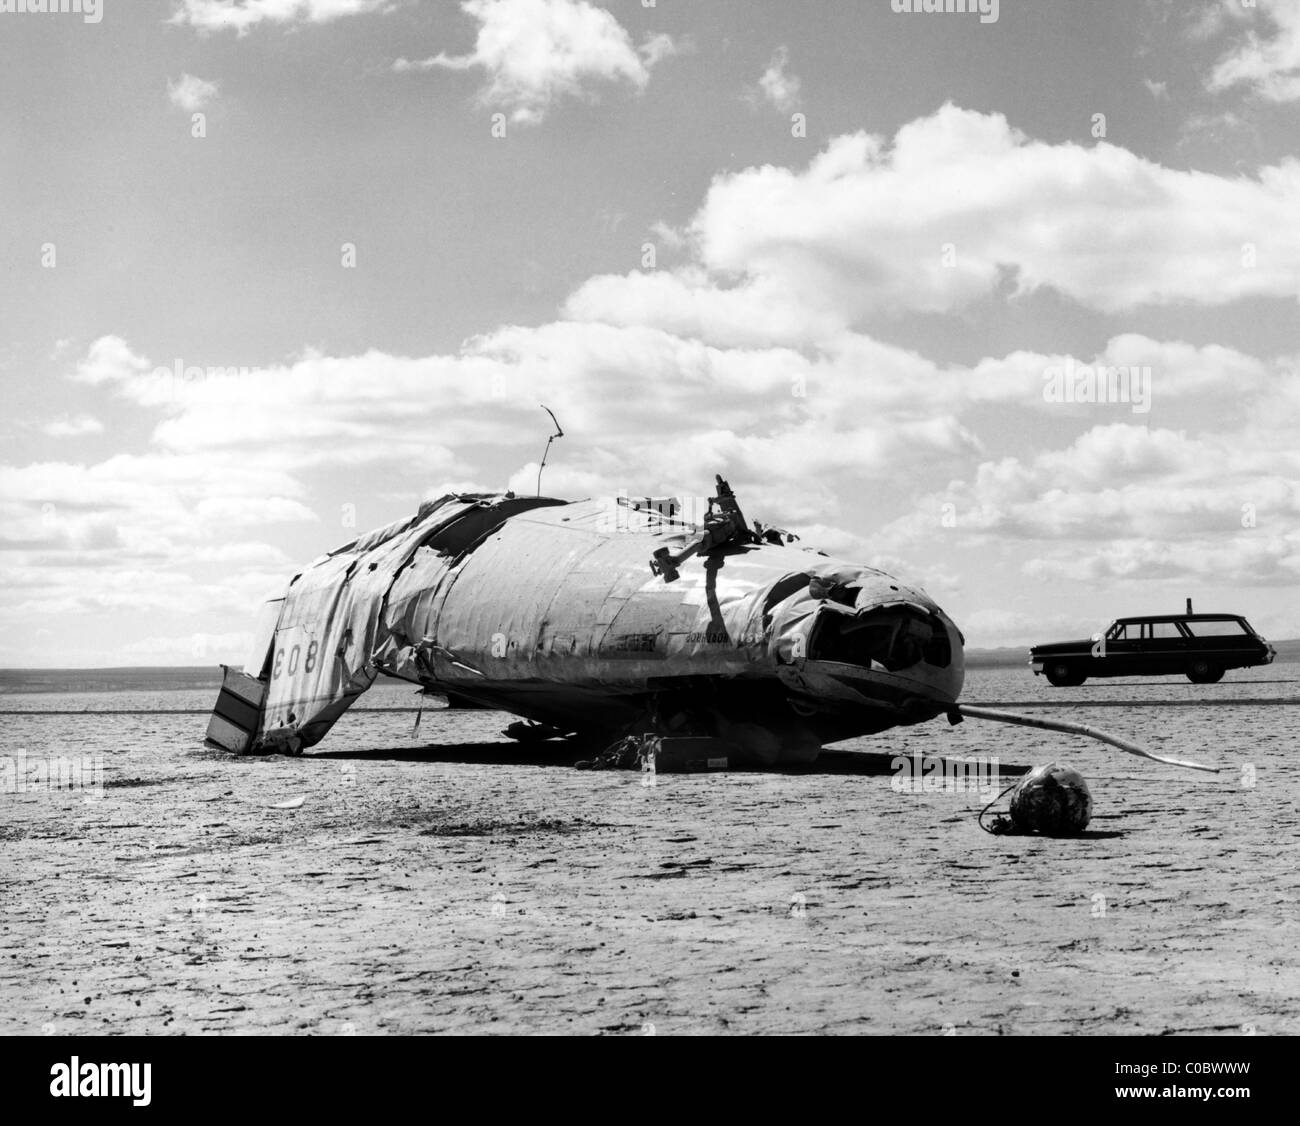 M2-F2 lifting body aircraft crash landed on Rogers Dry Lakebed, Dryden Flight Research Center, Edwards, California May 10, 1967 Stock Photo